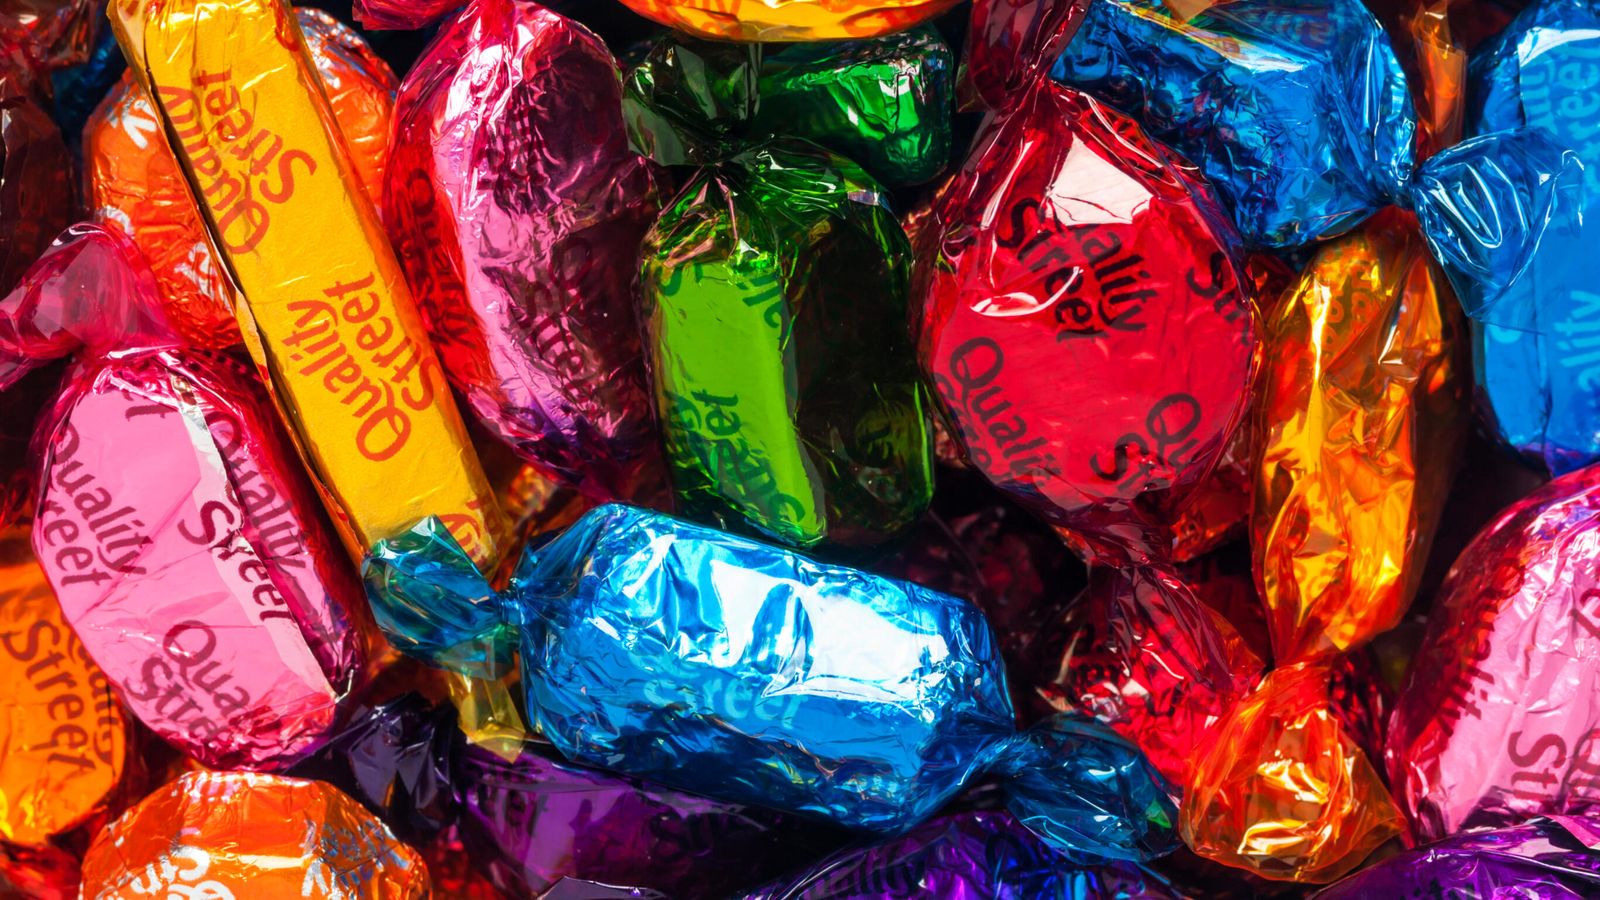 Quality street fans outraged over new eco-friendly wrappers that